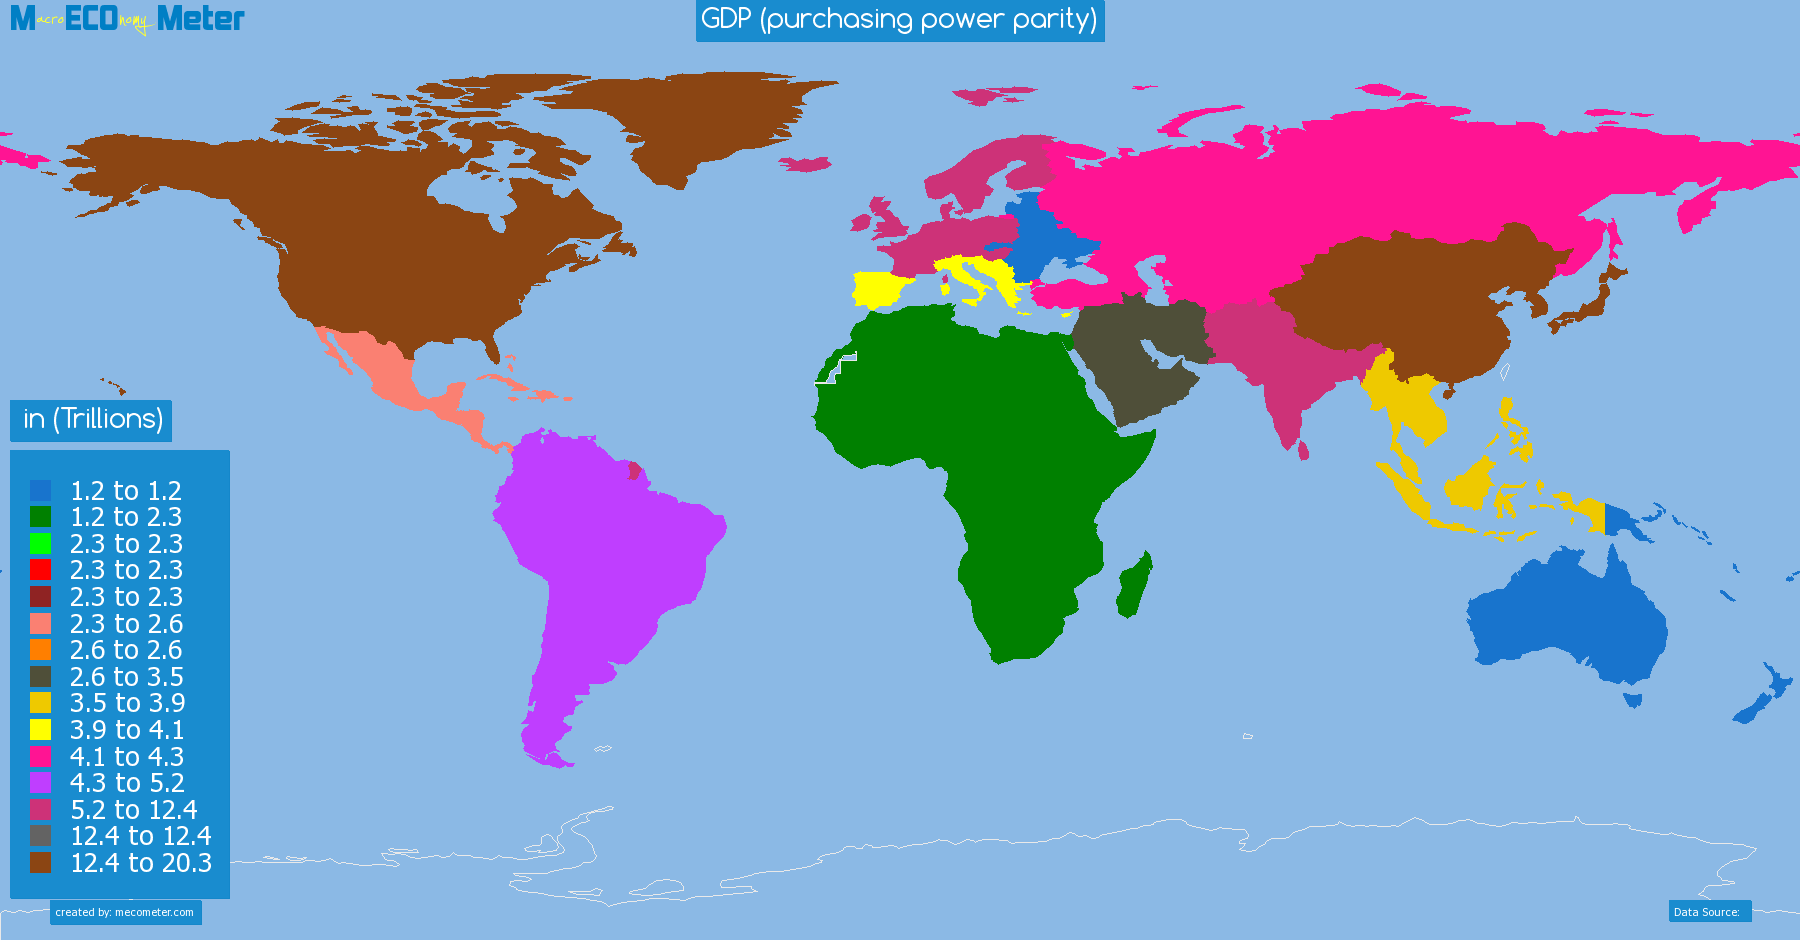 GDP (purchasing power parity) by region